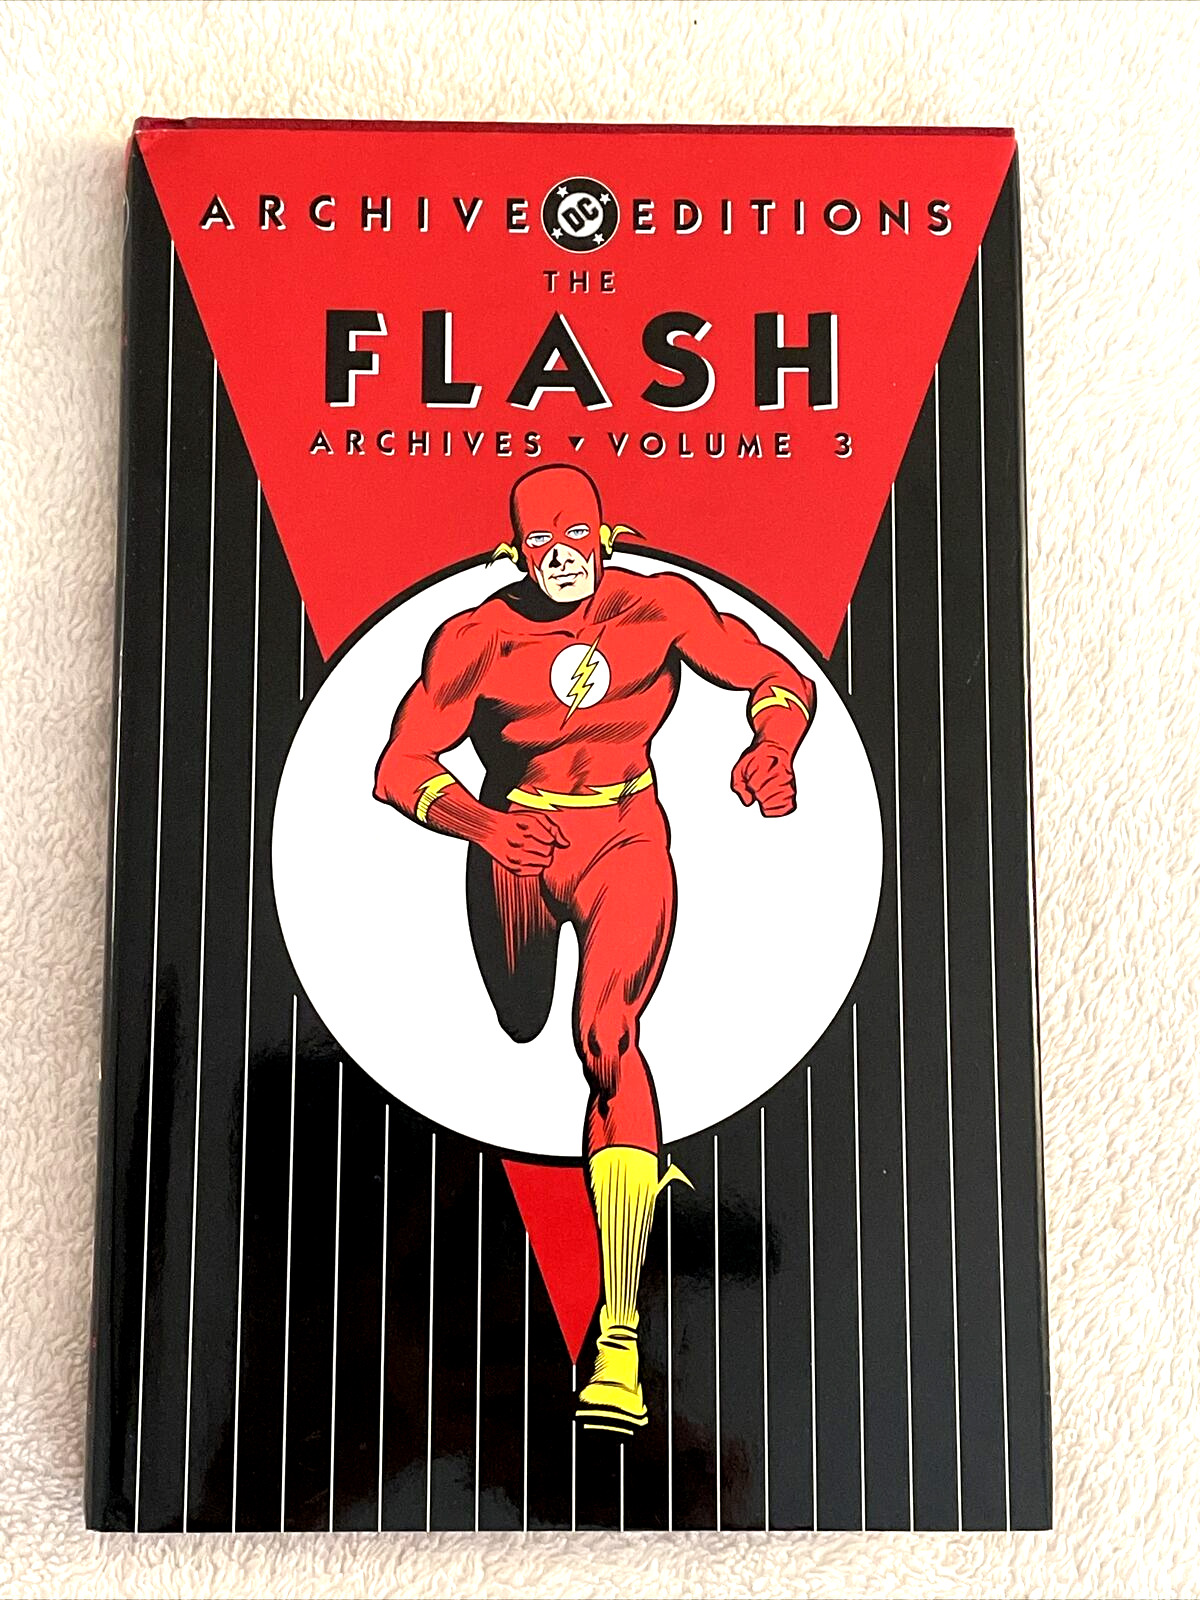 The Flash Archives #3 (DC Comics, March 2002)